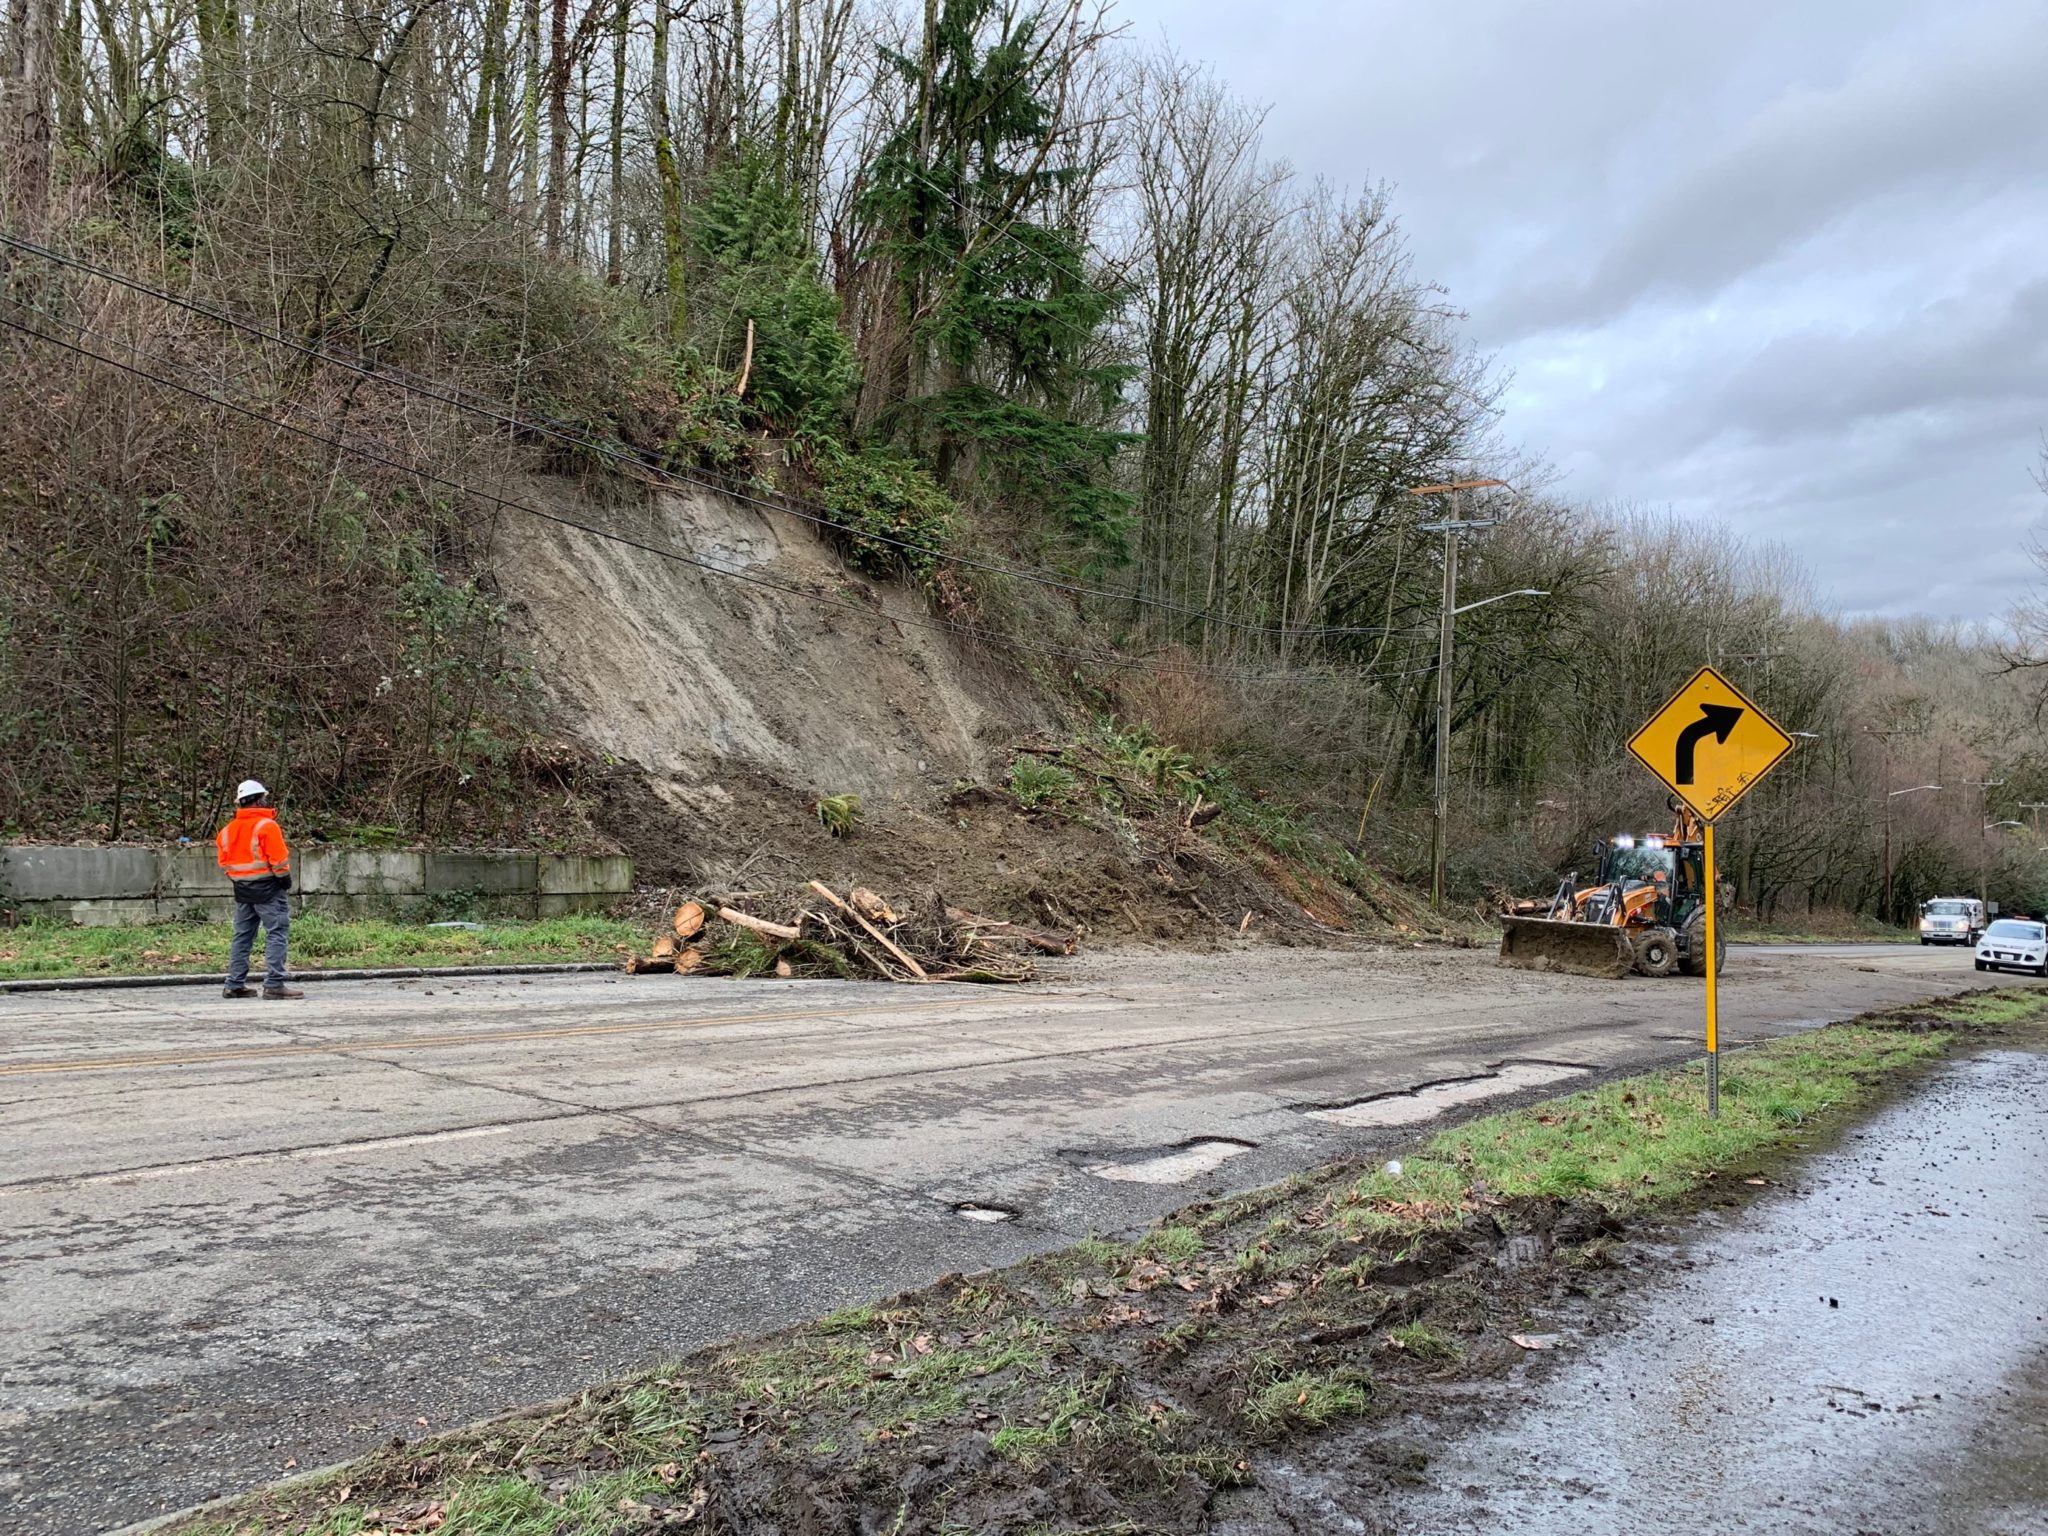 This photo shows clean-up activities along Highland Park Way SW on Saturday, January 8. A worker wearing an orange safety jacket watched the scene, and an excavator is visible to the right clearing the street.